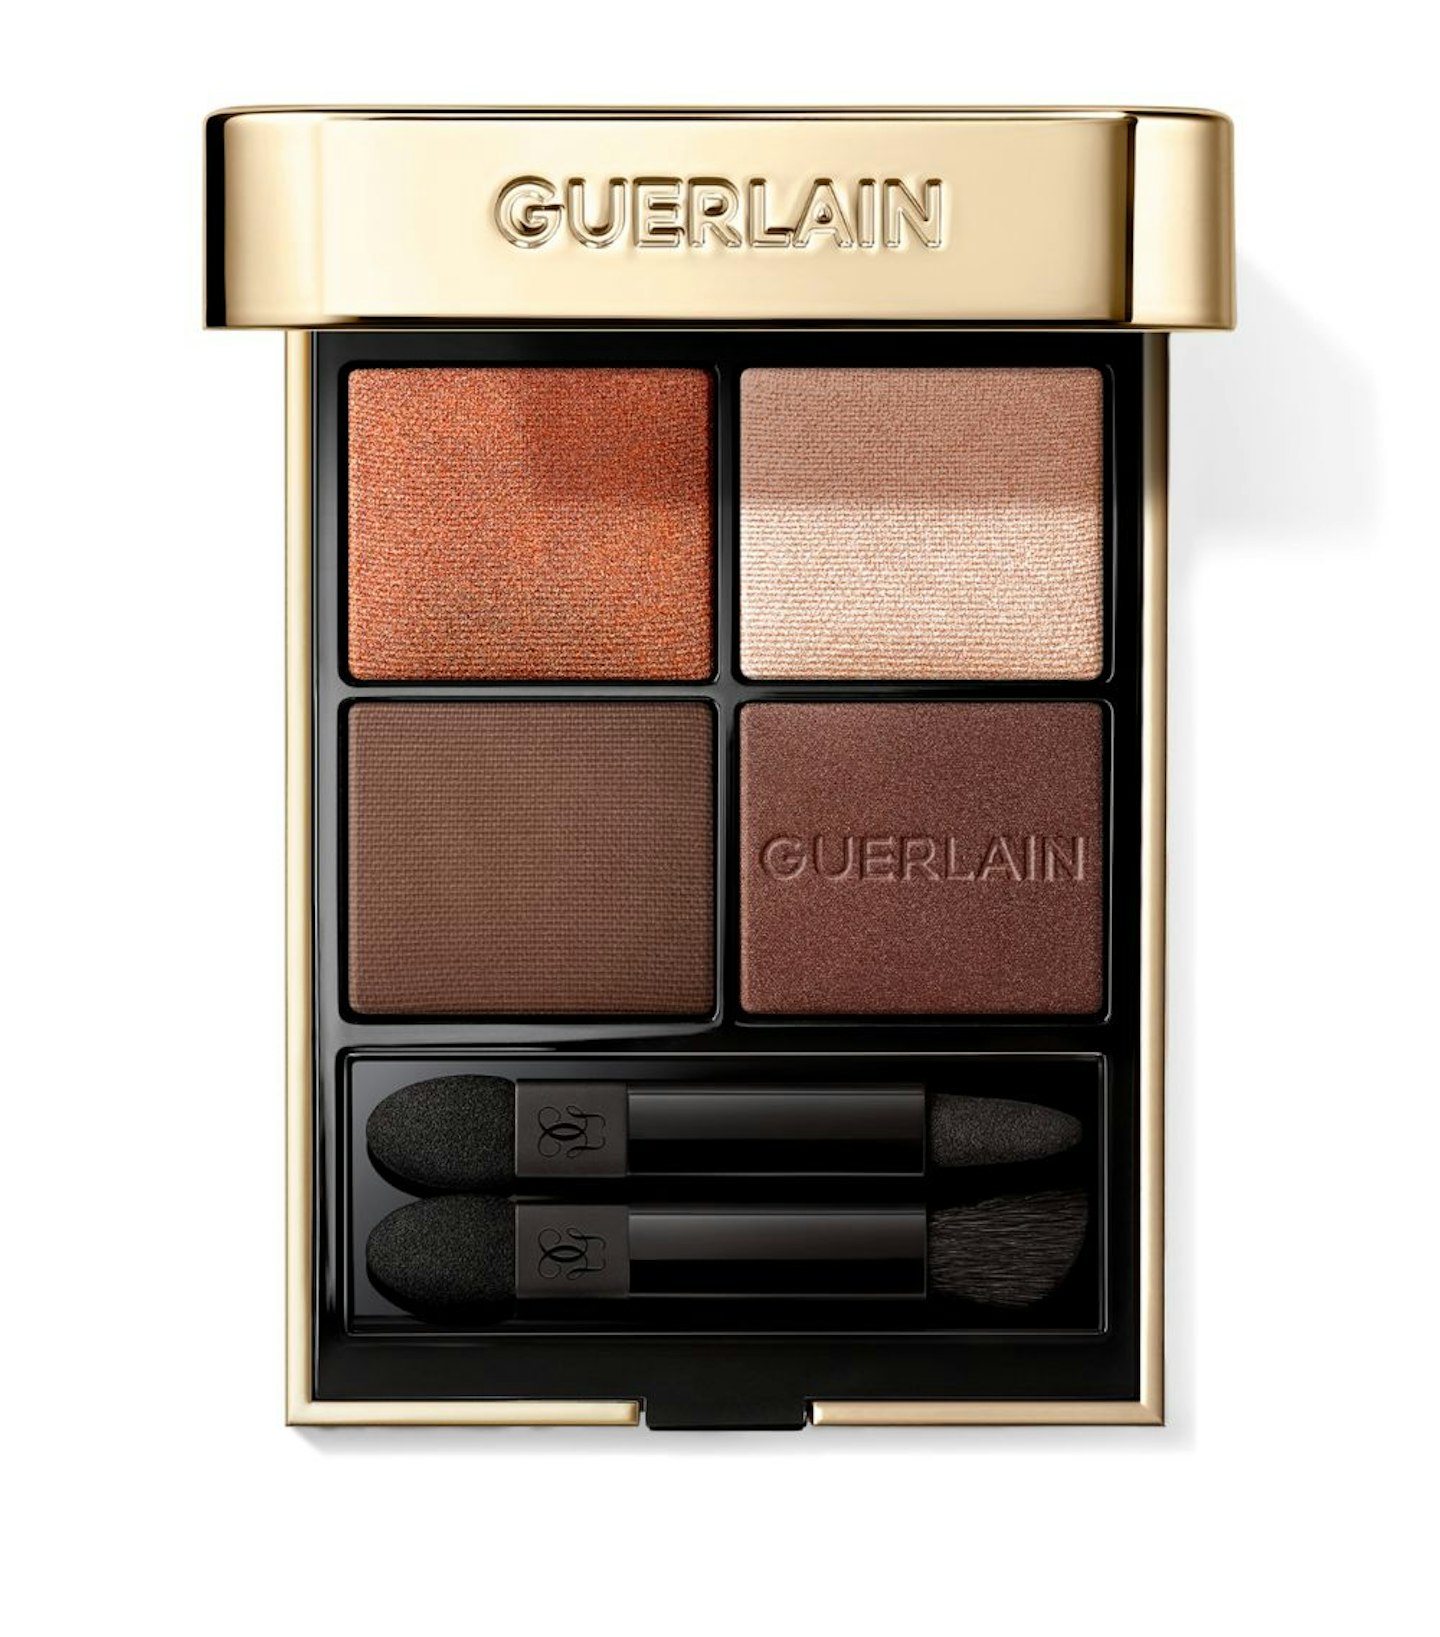 Guerlain Ombres G Eyeshadow Quad in 910 Undressed Brown